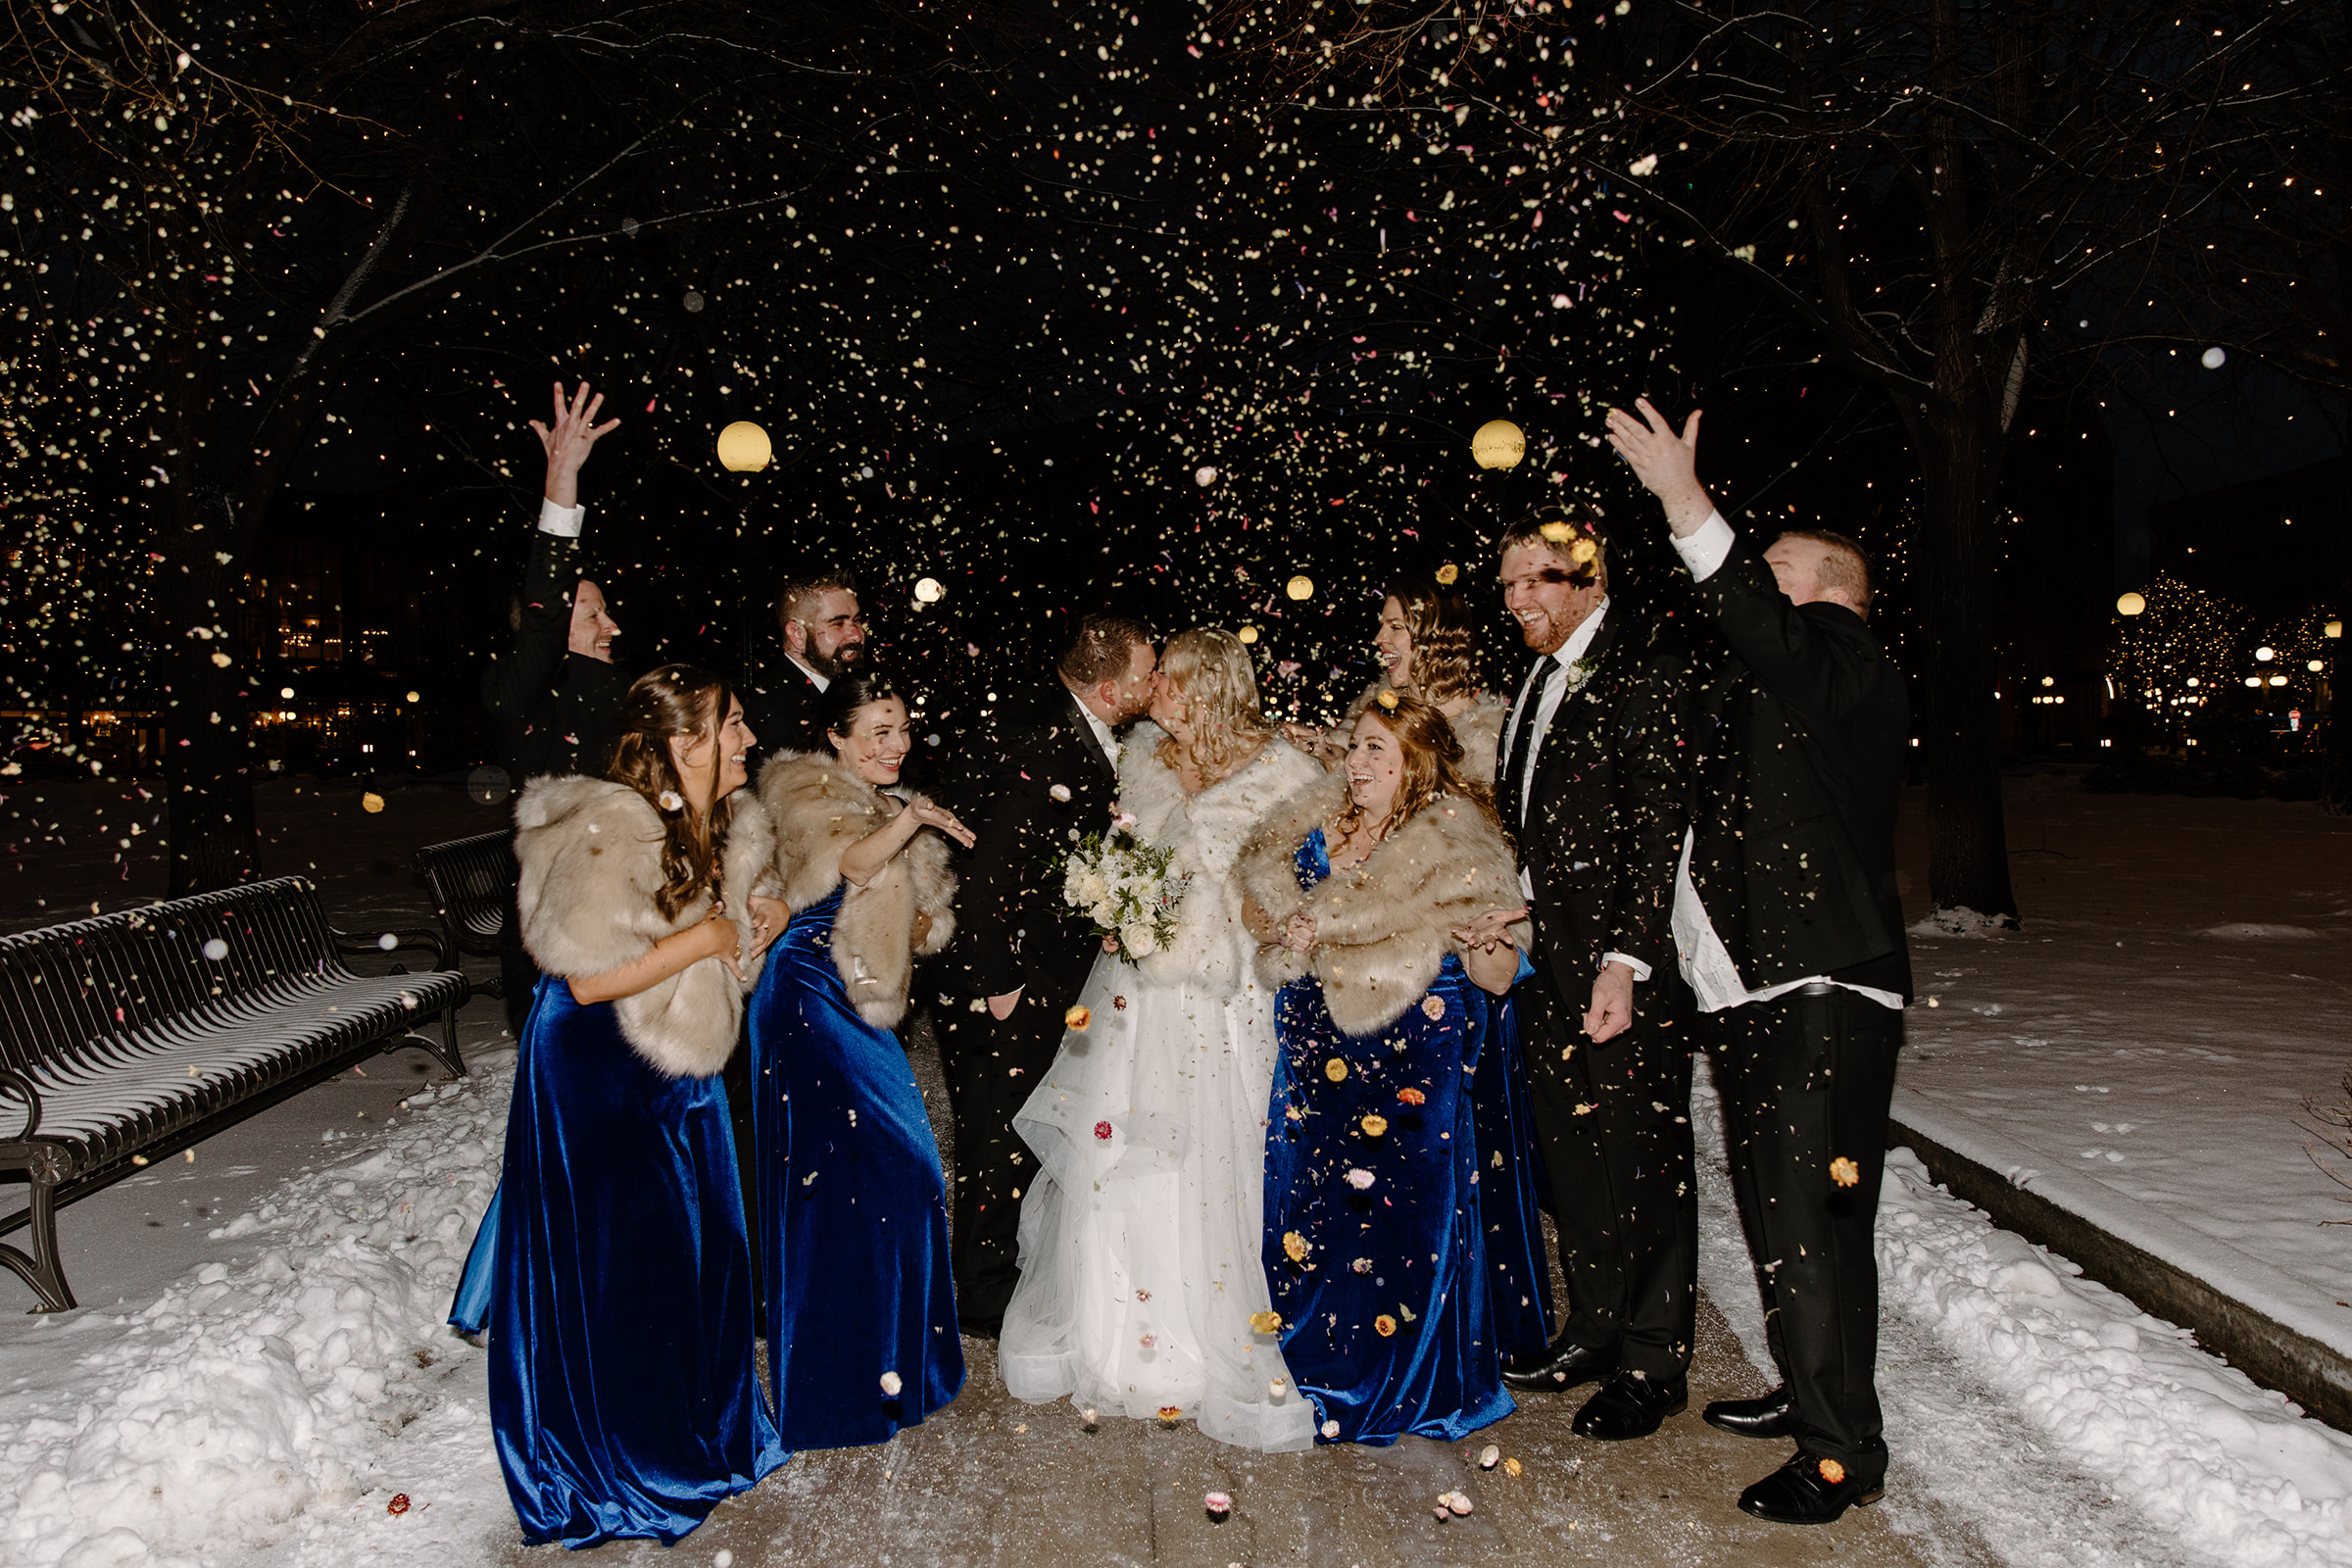 Wedding party cheer while bride and groom kiss during snow storm